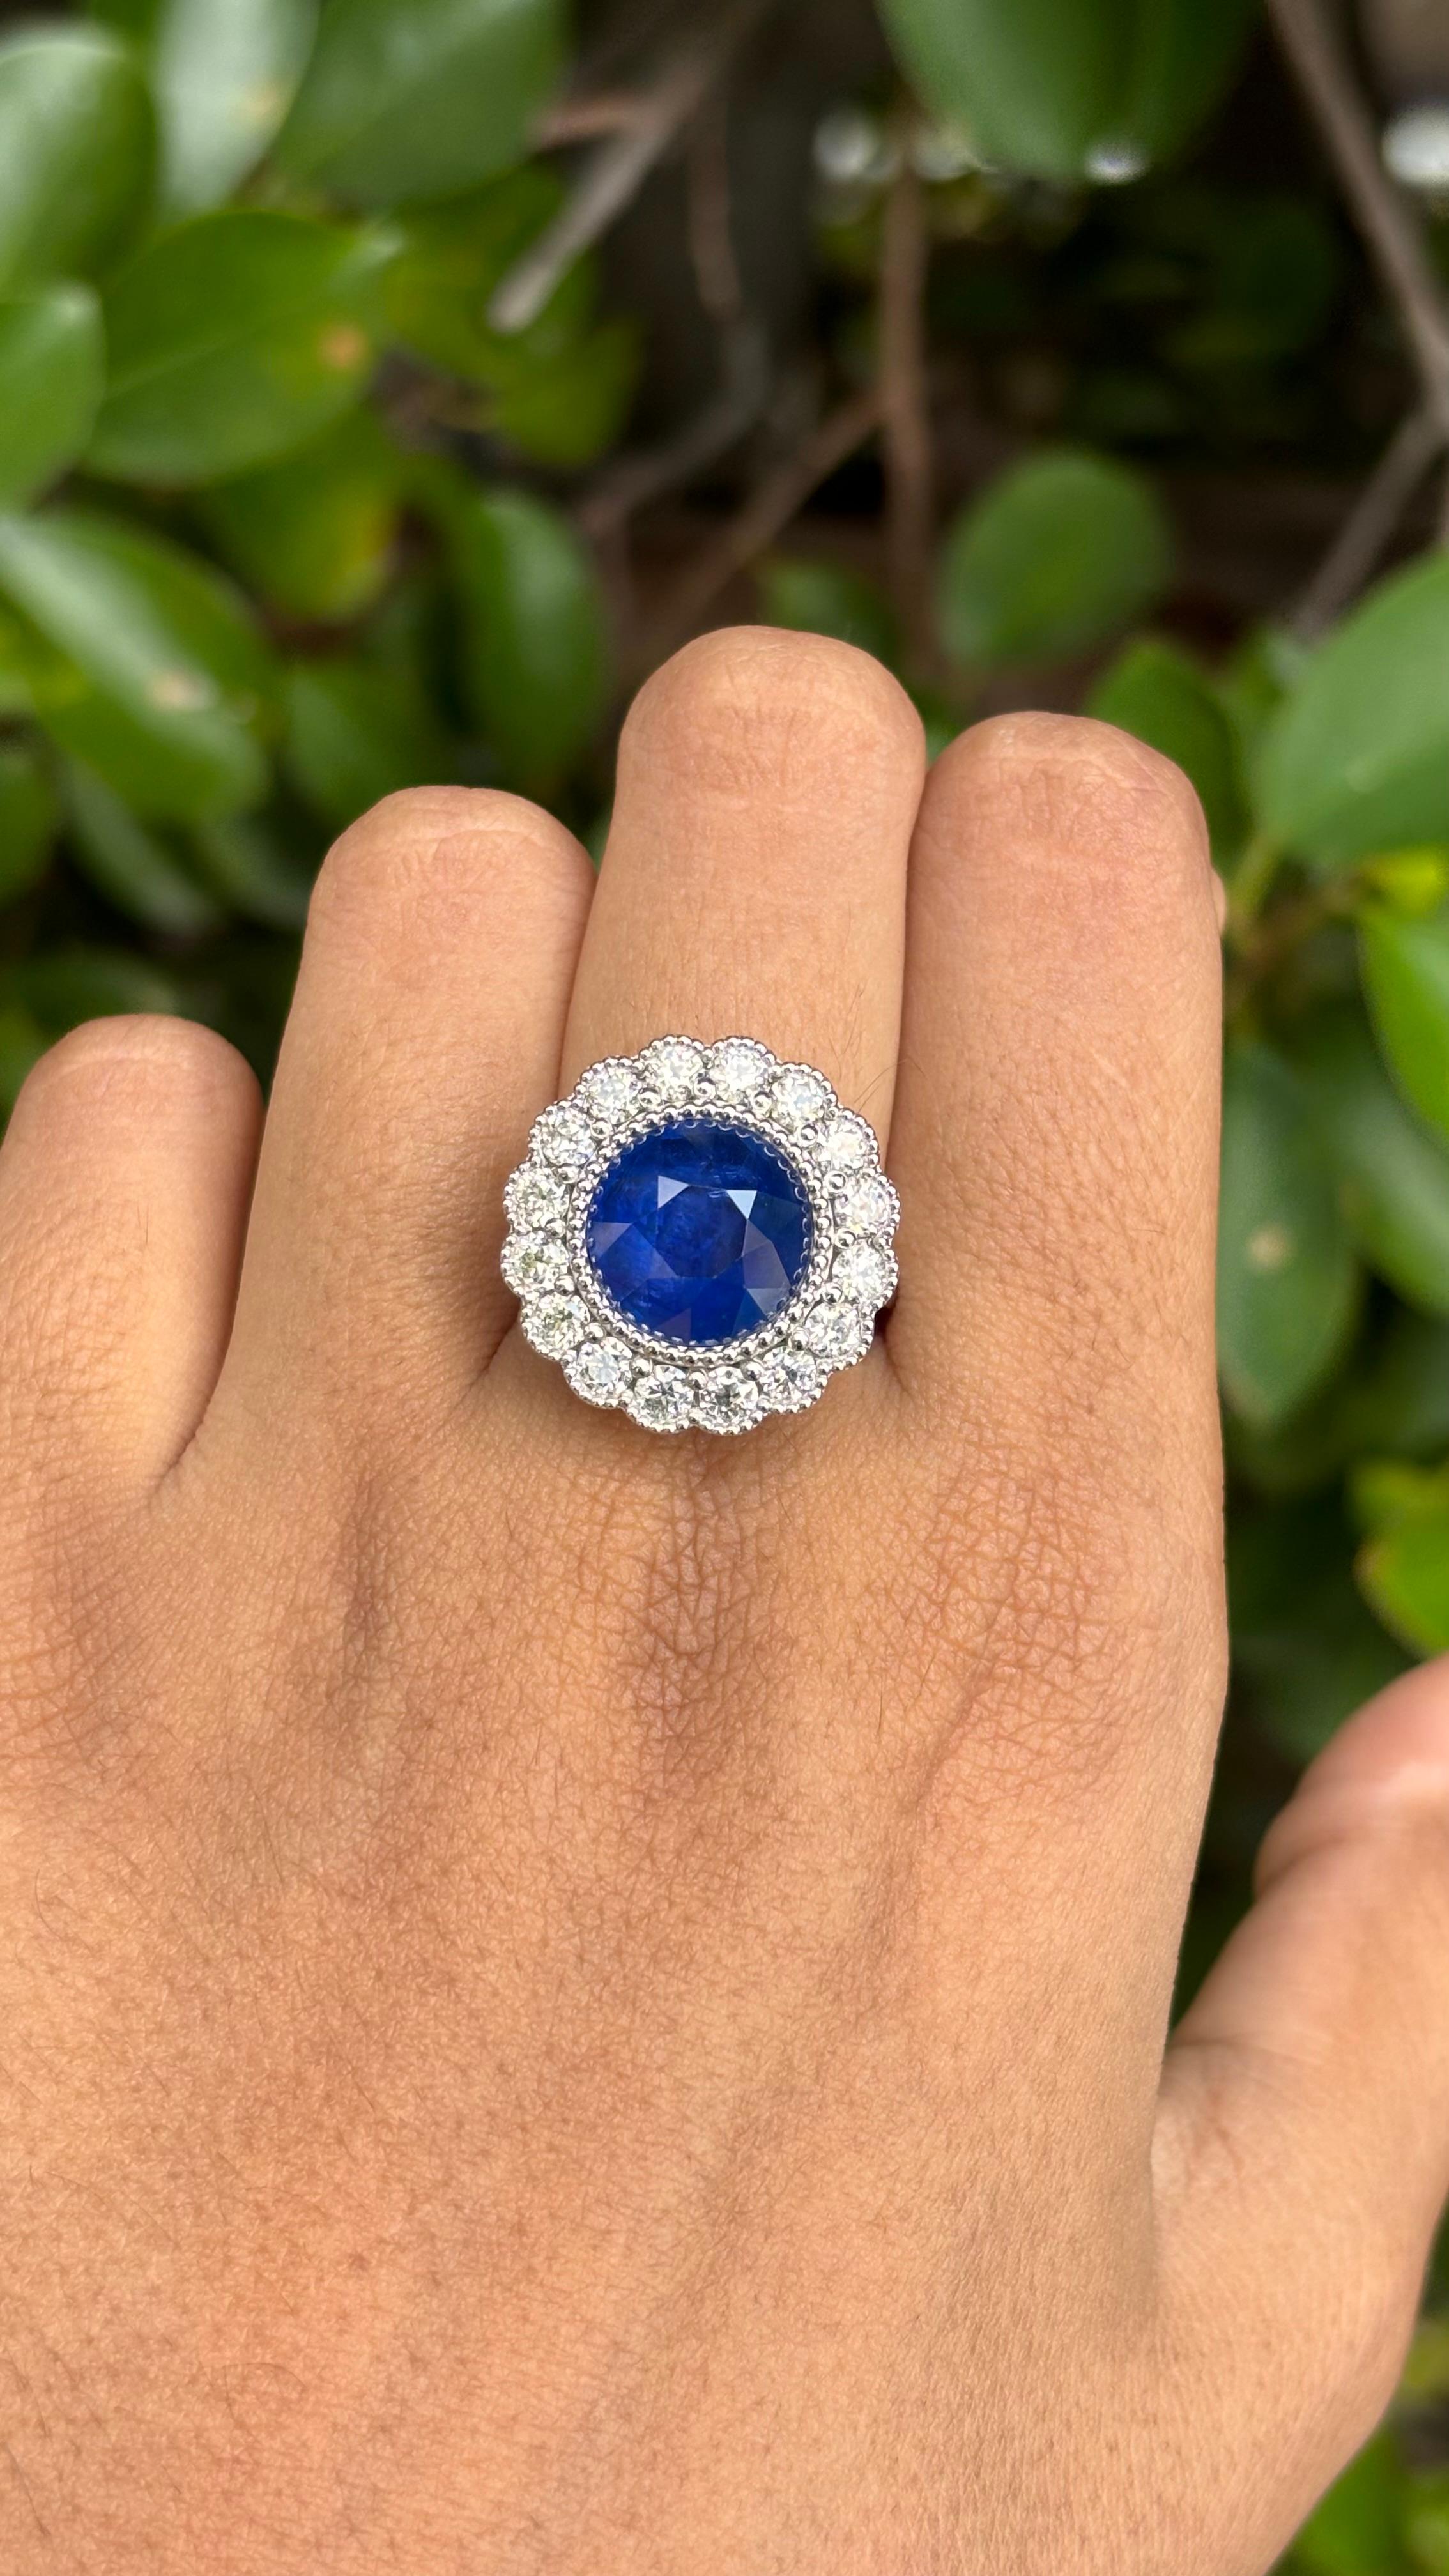 Art Deco 6.52 Ct Round Ceylon Sapphire Ring with Old Mine Cut Diamonds in 18K White Gold For Sale